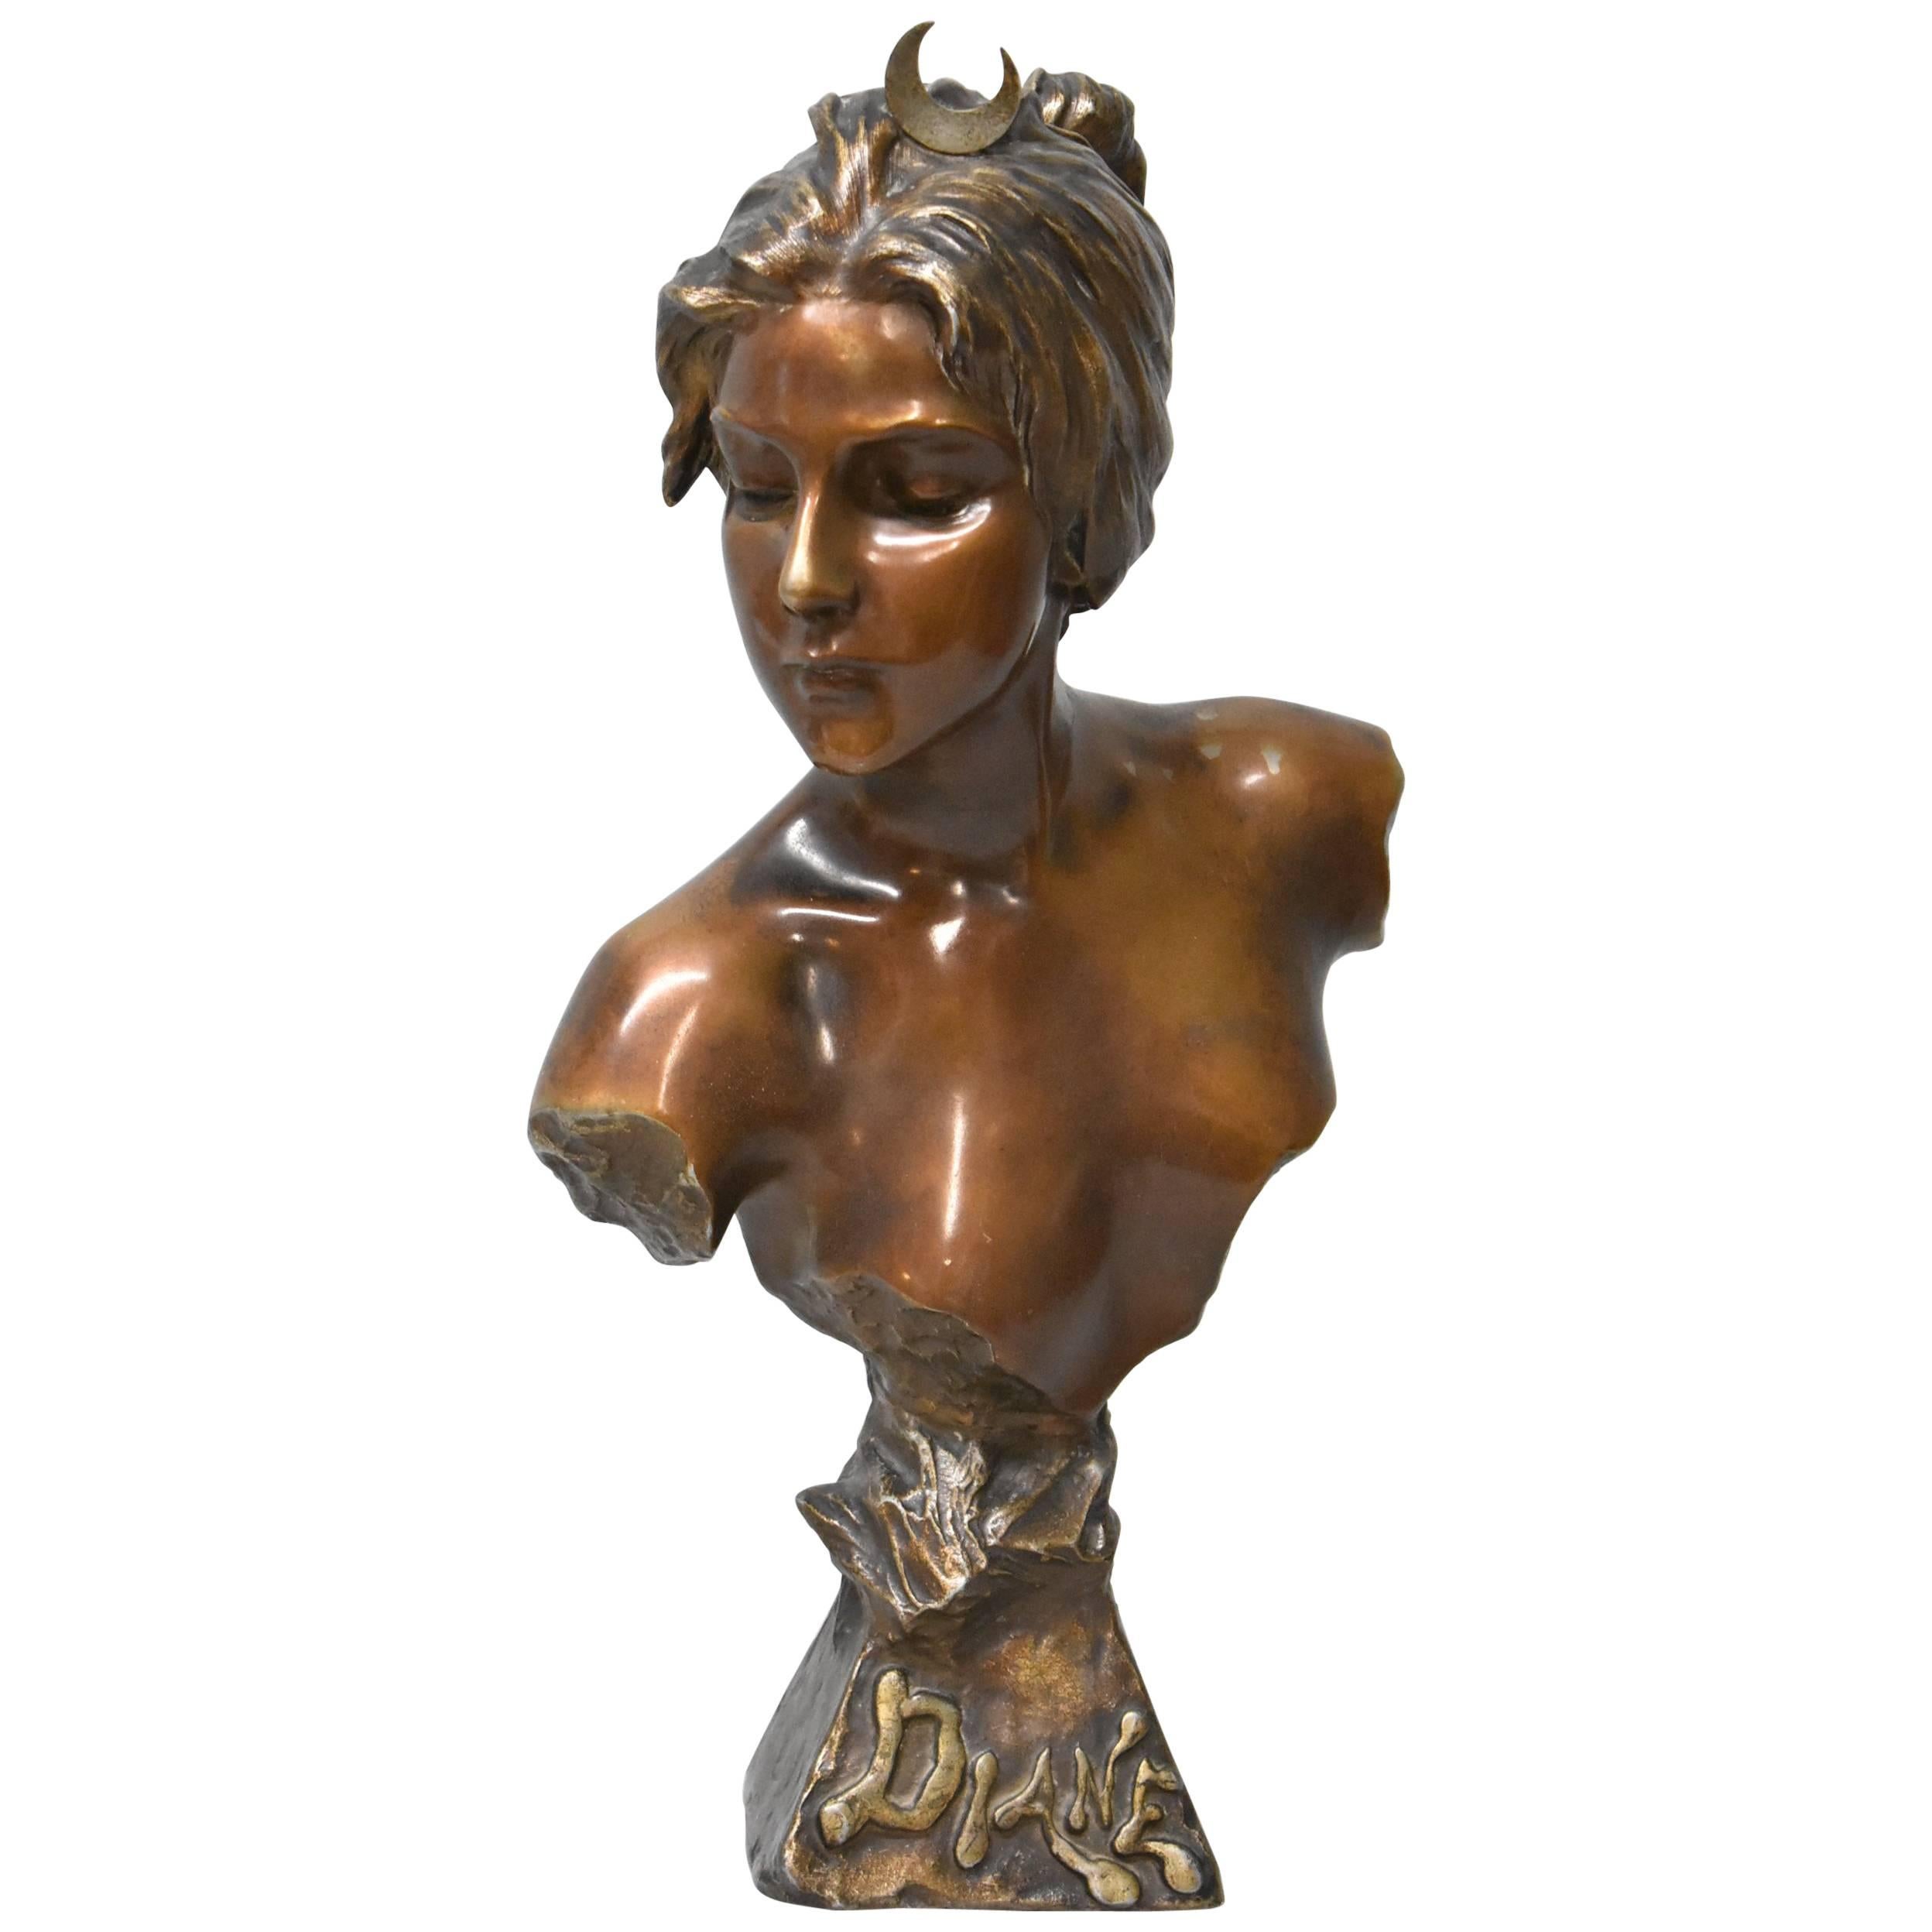 Female Sculpture Bust "Diane" Attributed to Emmanuel Villanis French